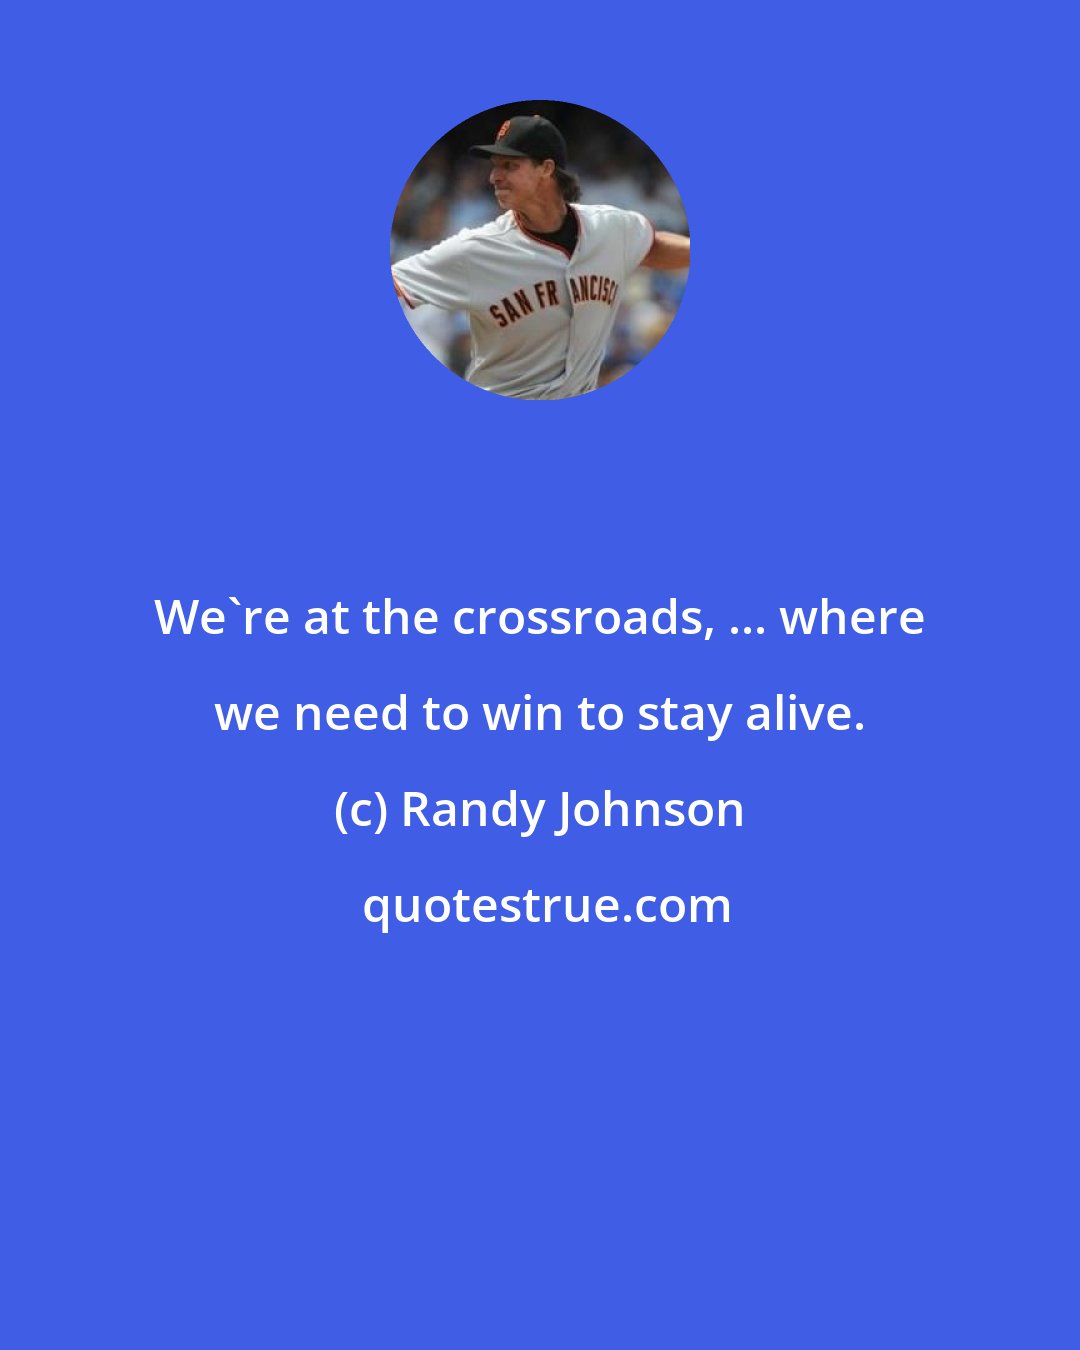 Randy Johnson: We're at the crossroads, ... where we need to win to stay alive.